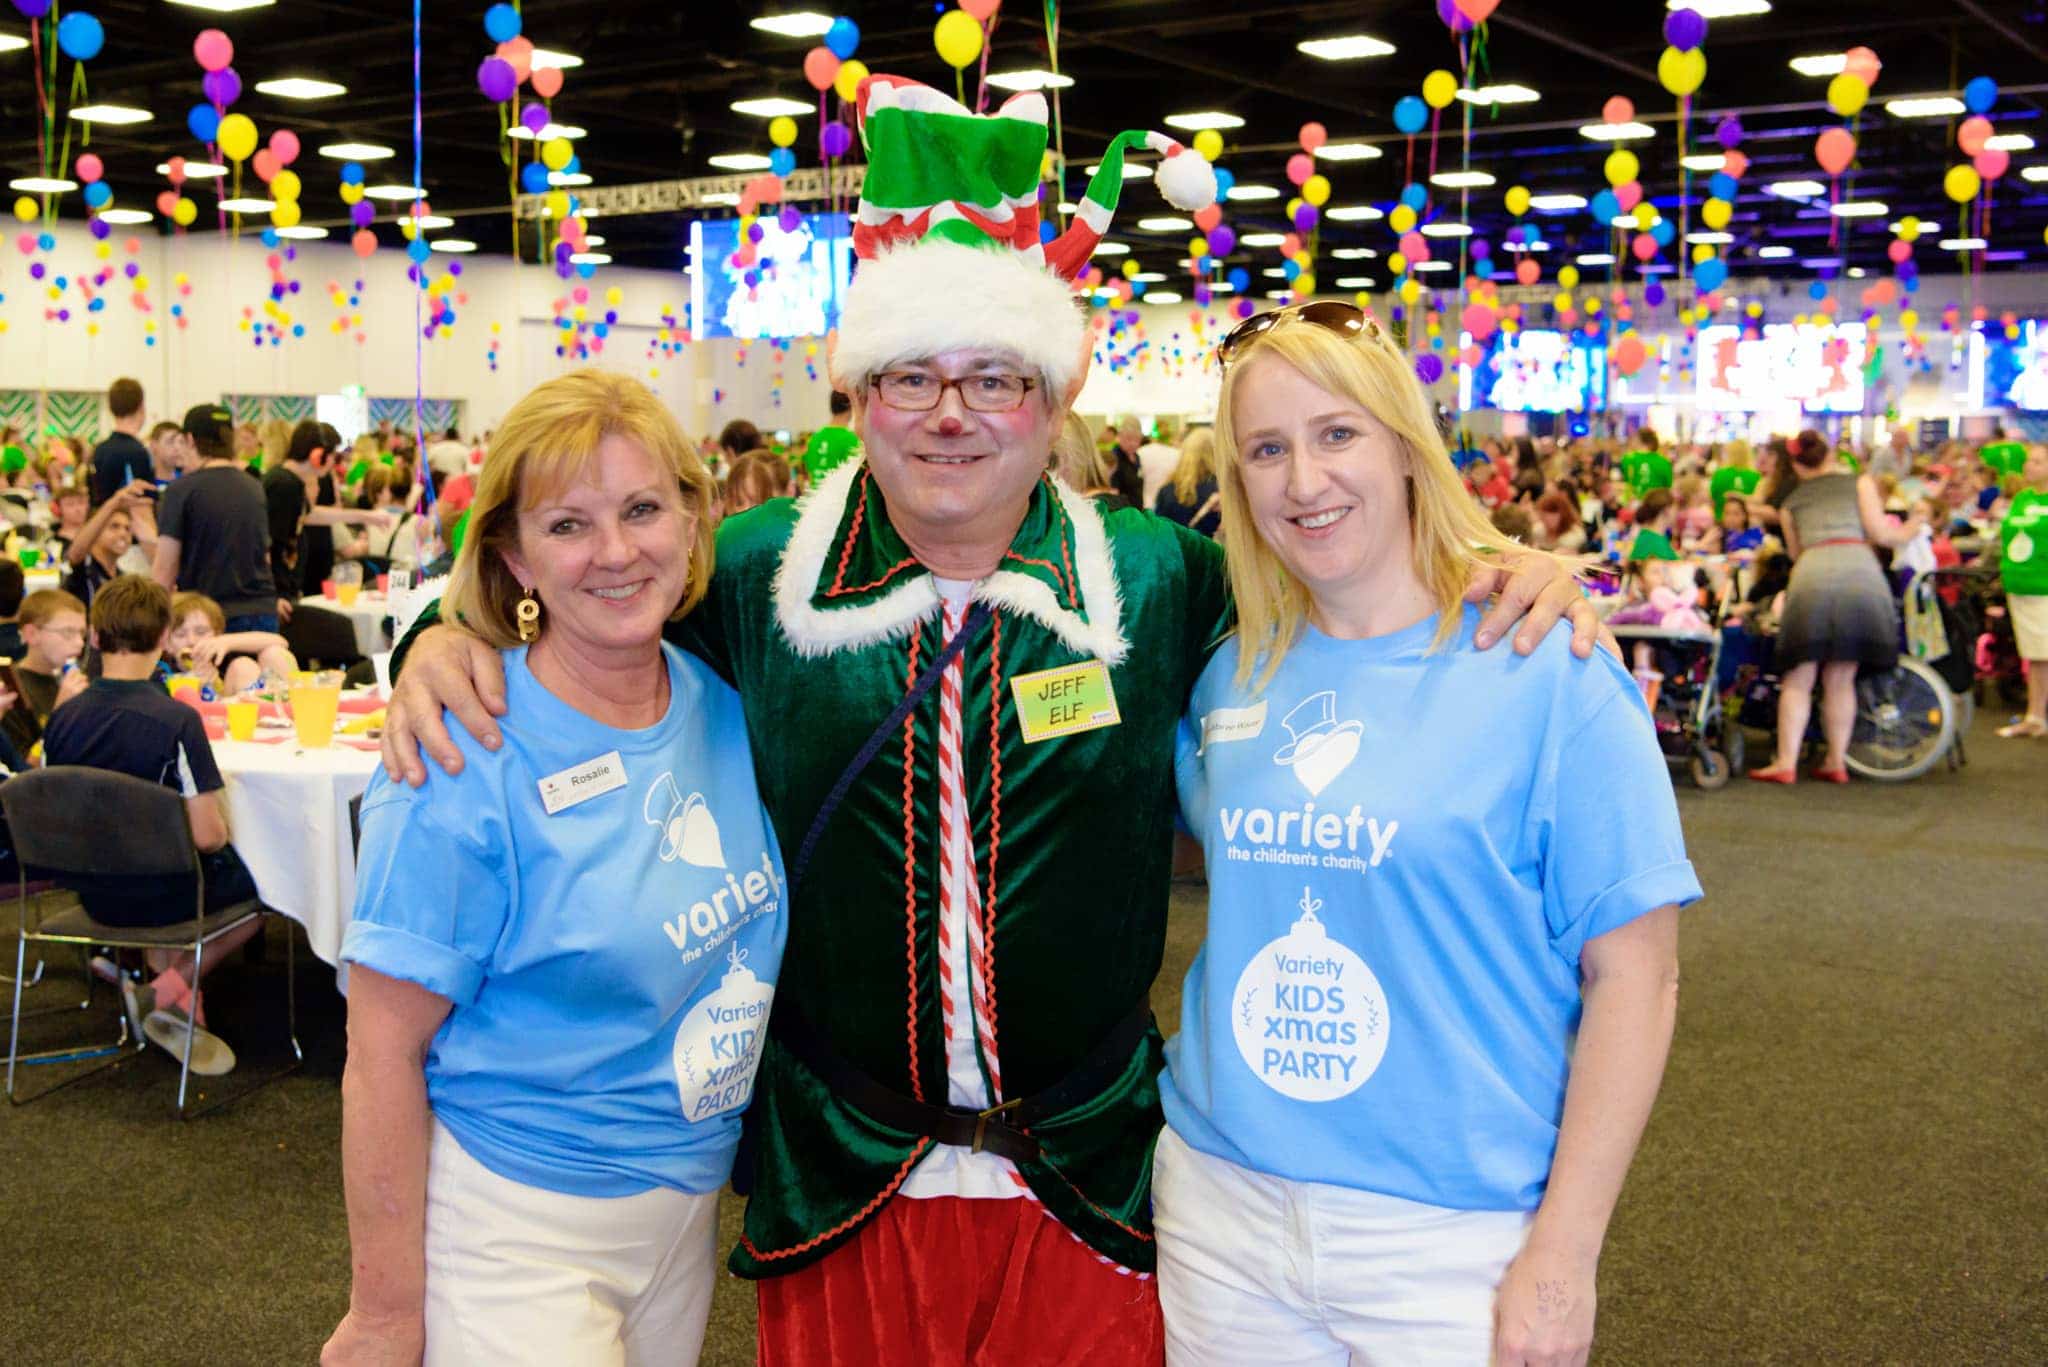 Christmas came early for thousands of Special children at the Variety Kid’s Xmas Party run by Ladies of Variety